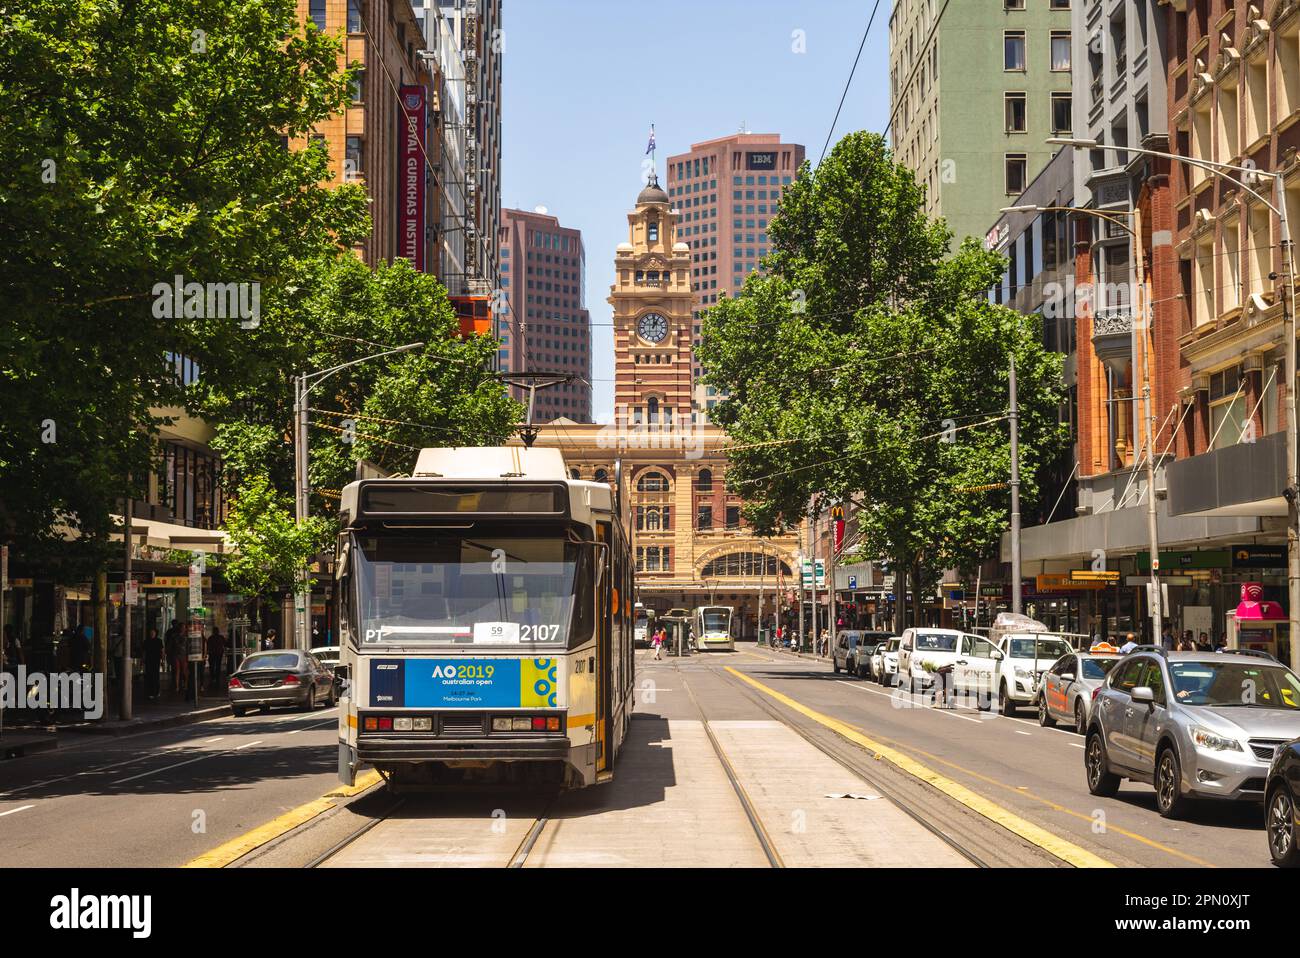 January 1, 2019: tram line in front of the clock tower of Flinders Street railway Station. flinders street station is a station opened in 1854 located Stock Photo